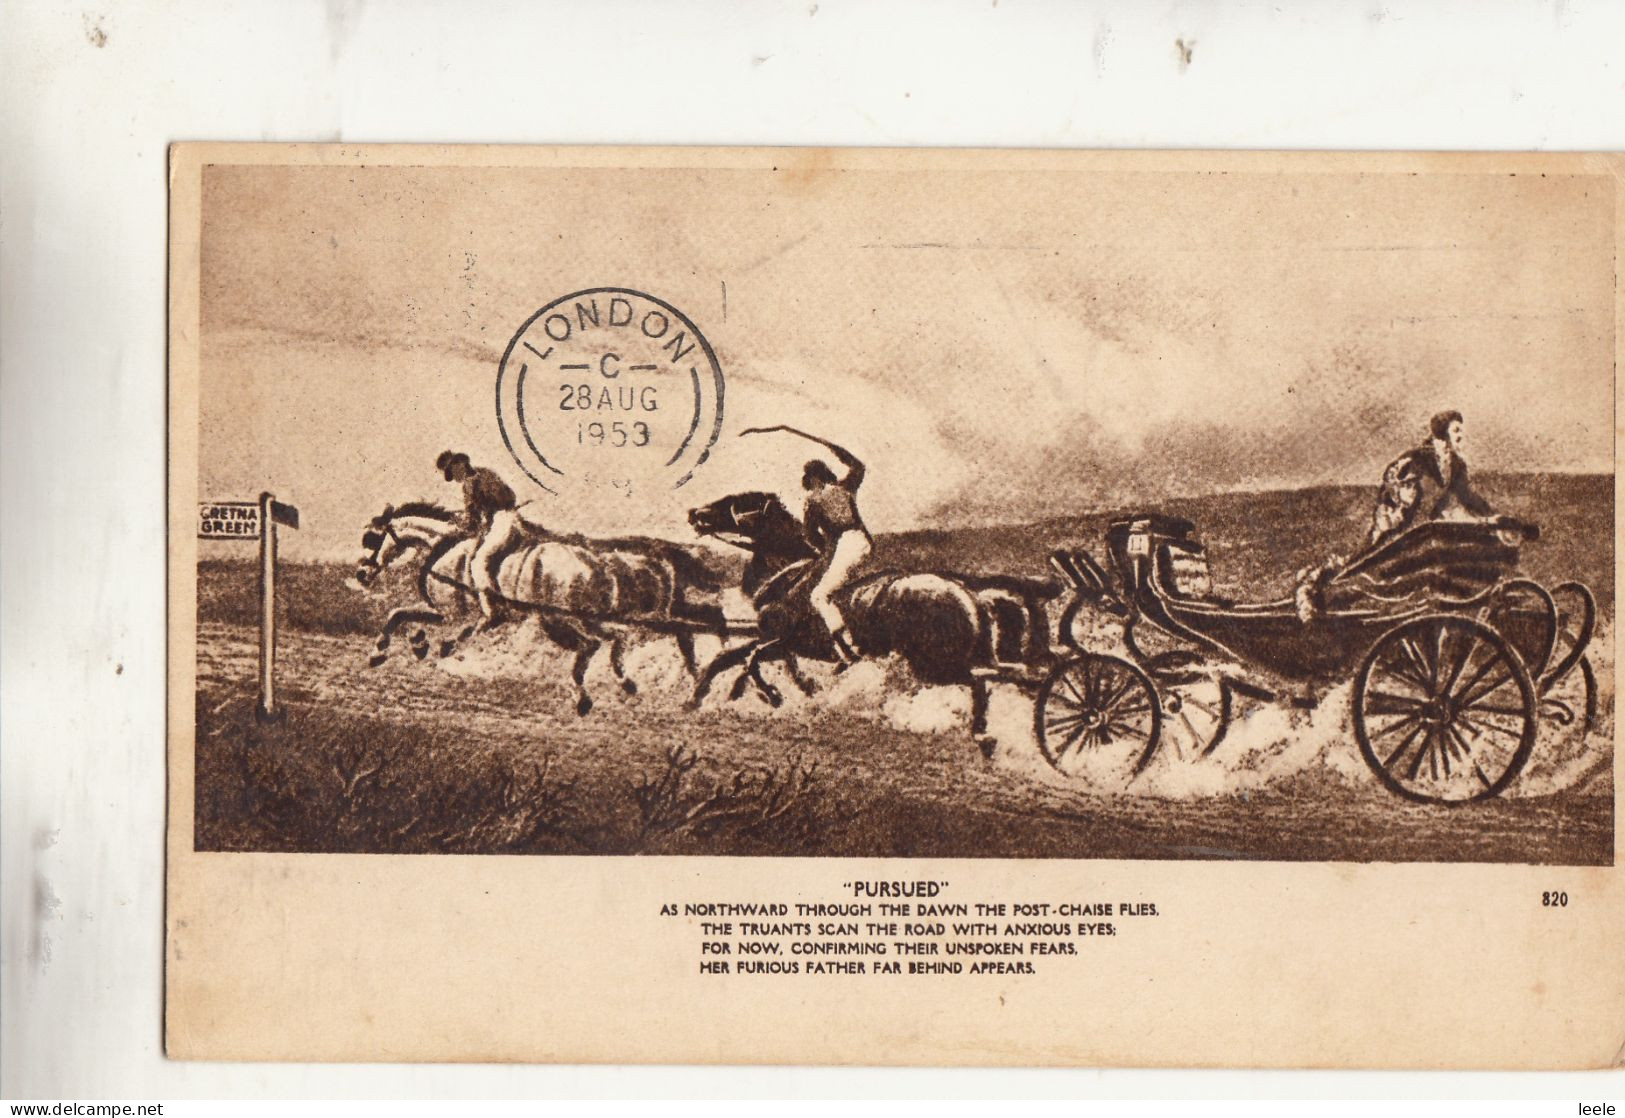 DB13. Vintage Postcard. Pursued. Couple On Way To Gretna Green. - Dumfriesshire